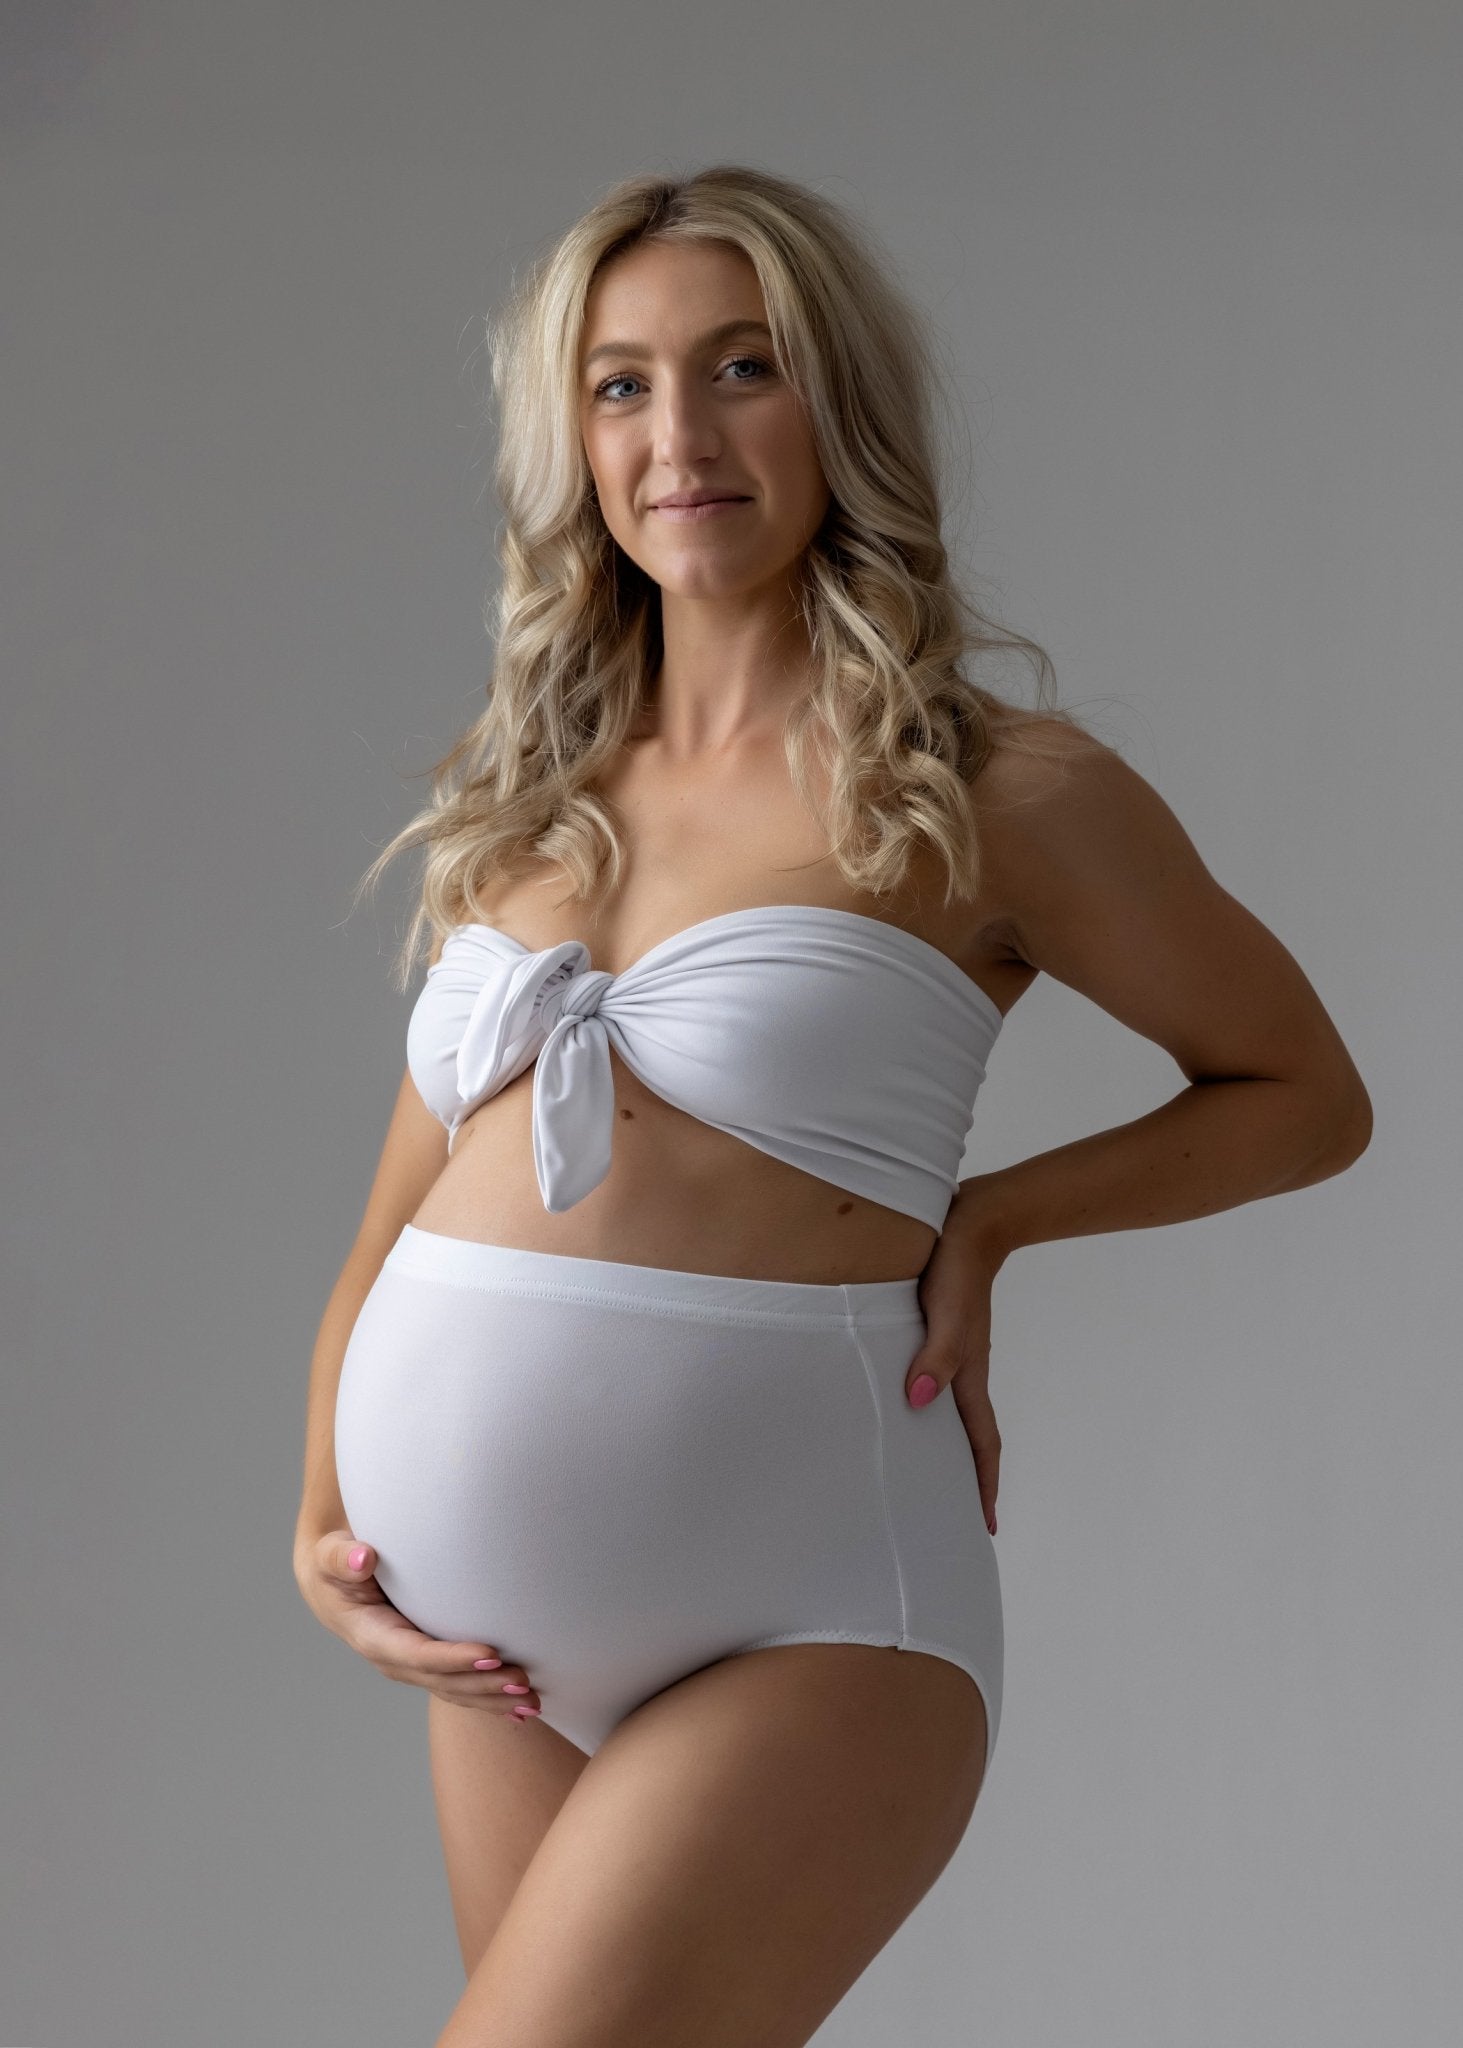 Kitty Panties - Bloom Maternity Gowns